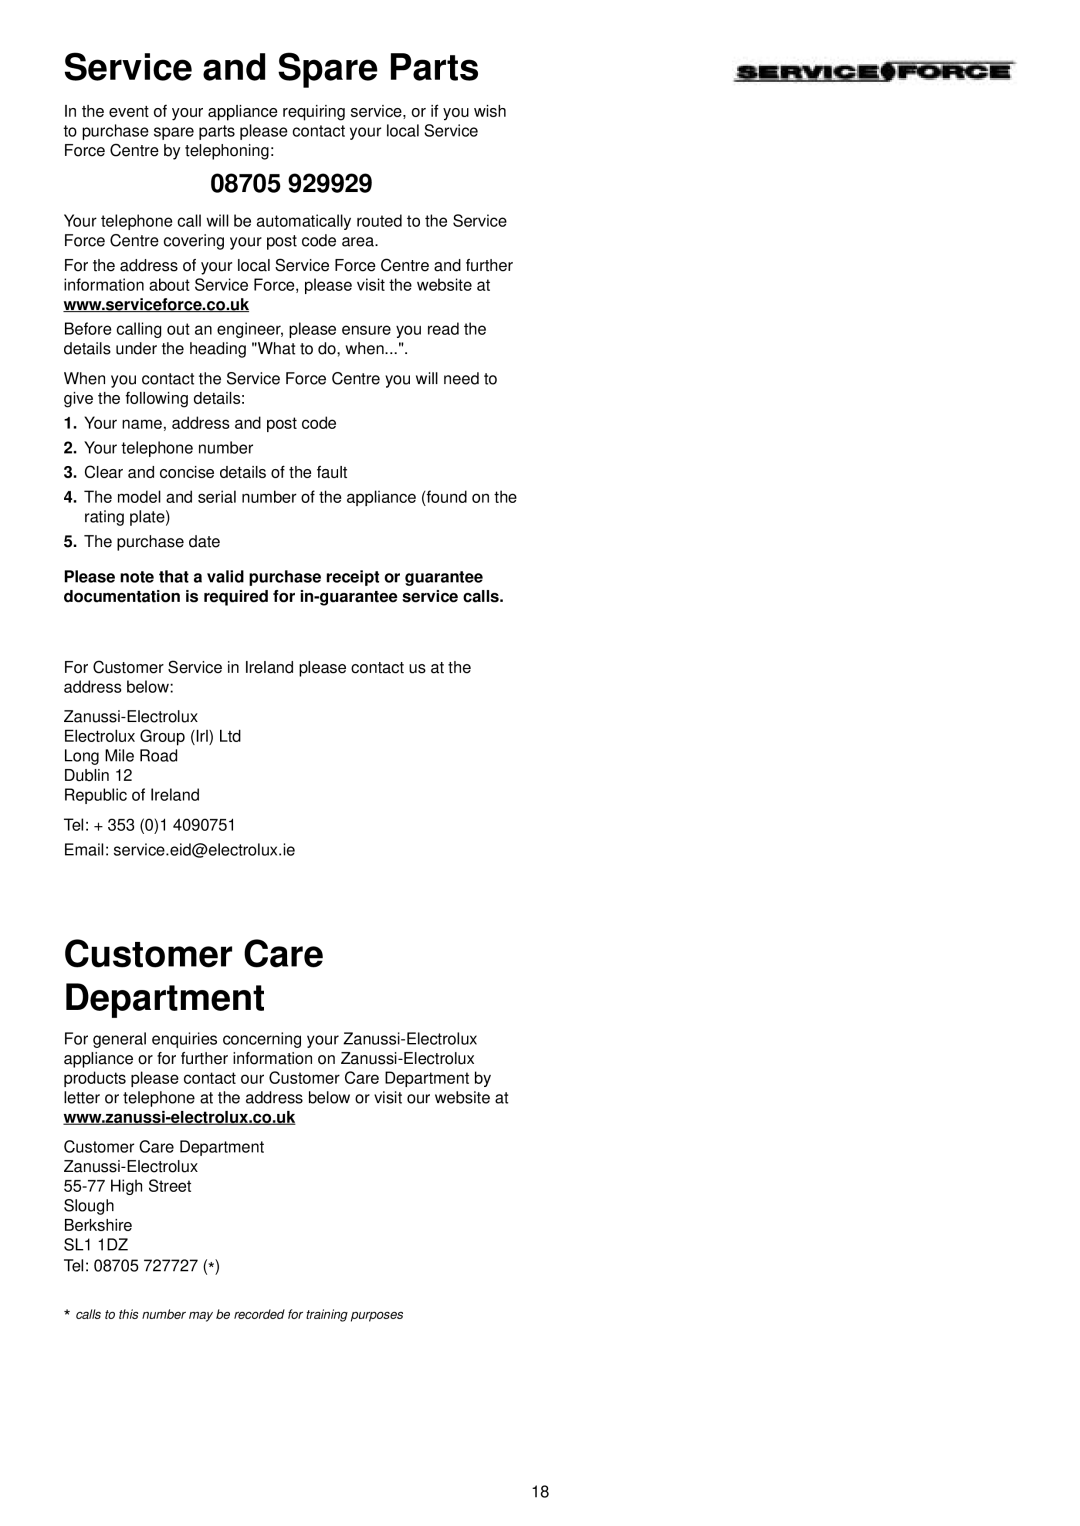 Zanussi DX 6451 manual Service and Spare Parts, Customer Care Department, 08705 